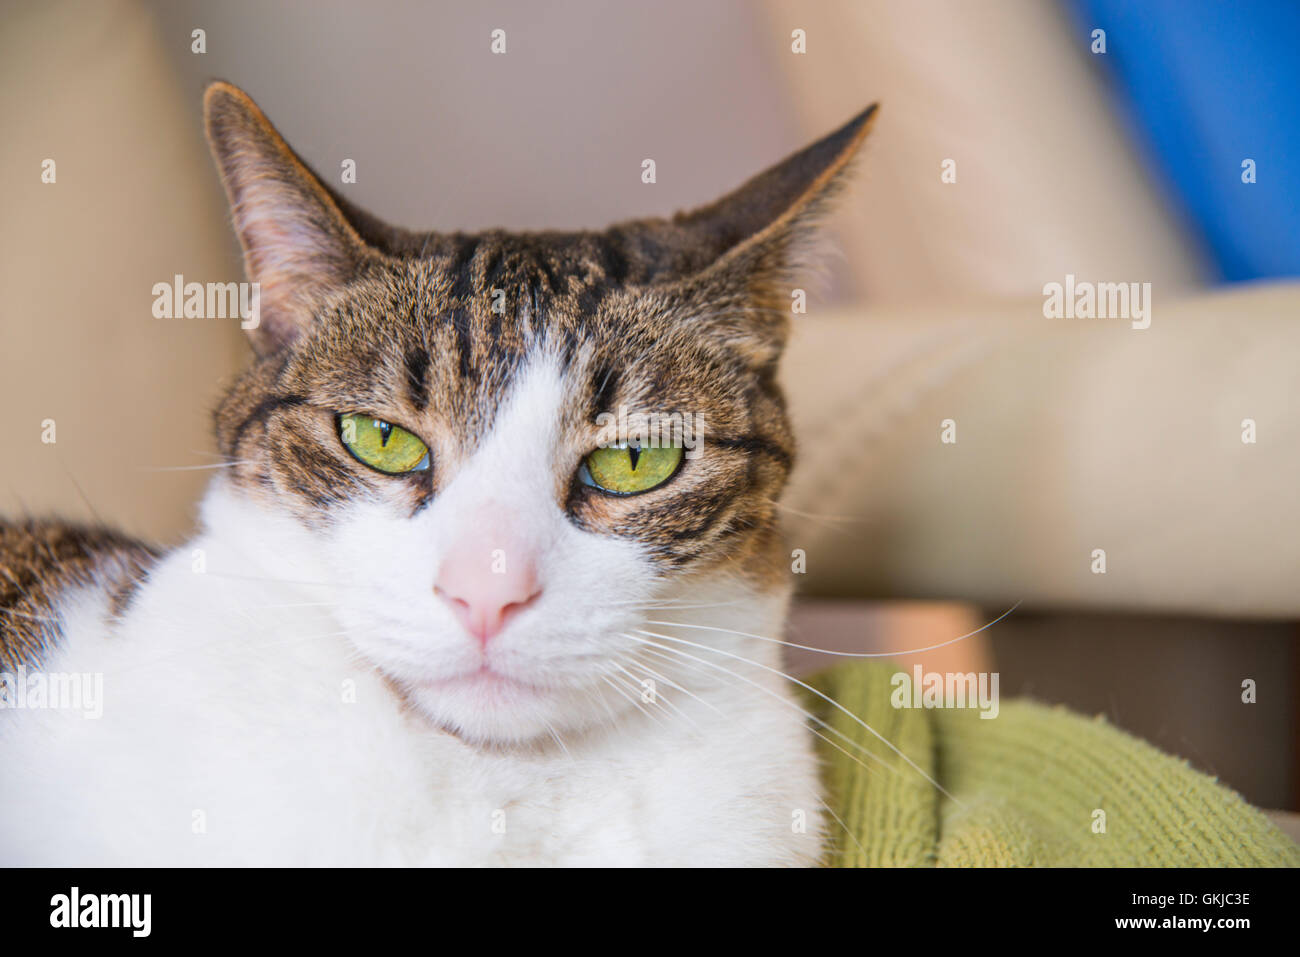 Tabby and white cat's face. Close view. Stock Photo